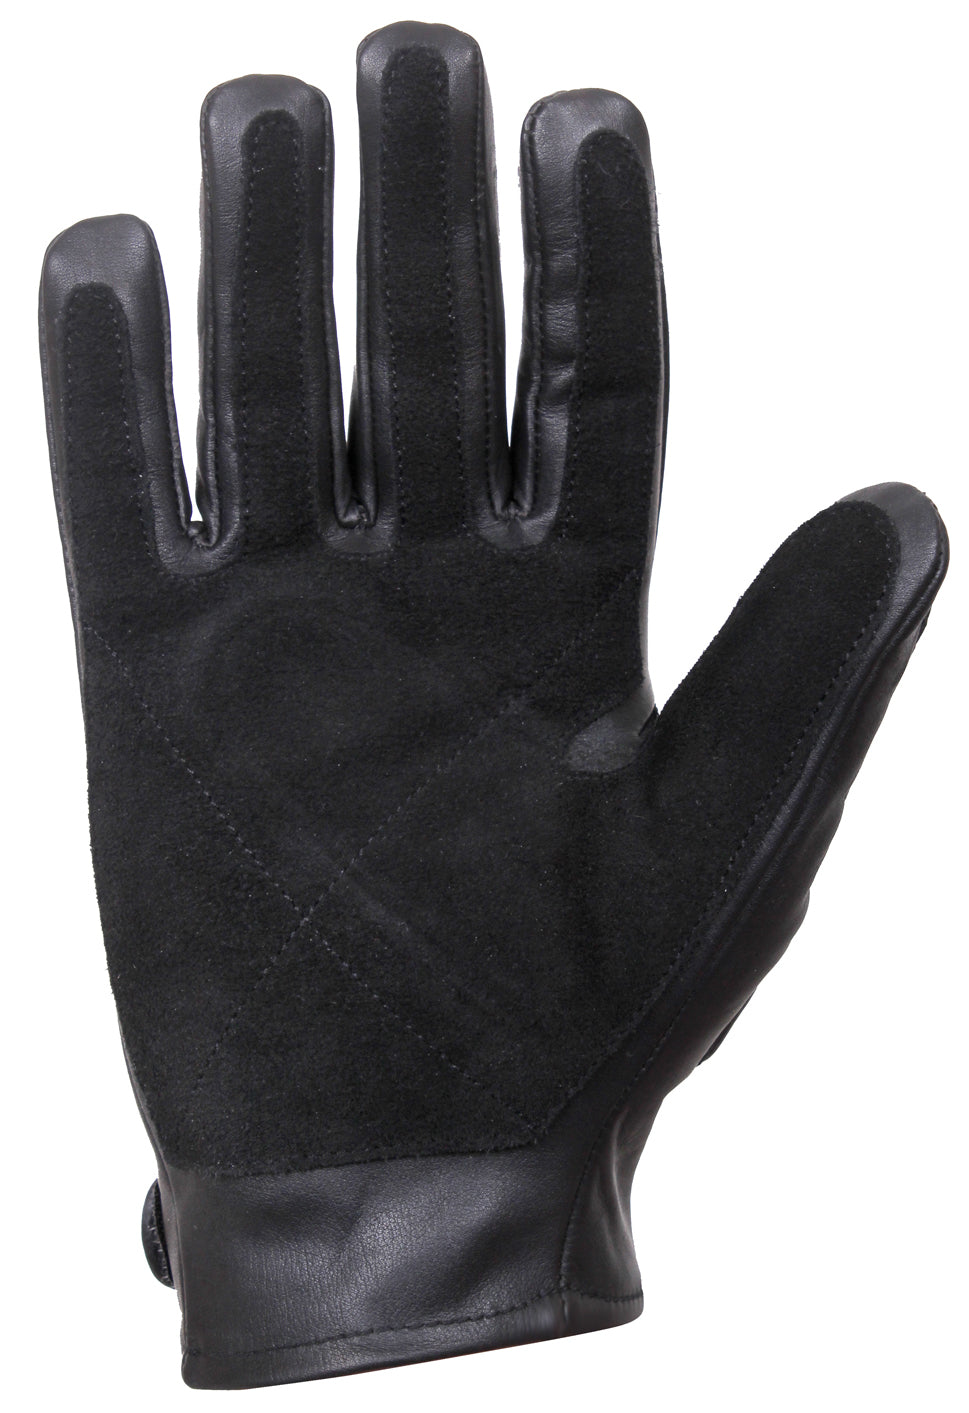 Rothco Padded Tactical Gloves - Tactical Choice Plus